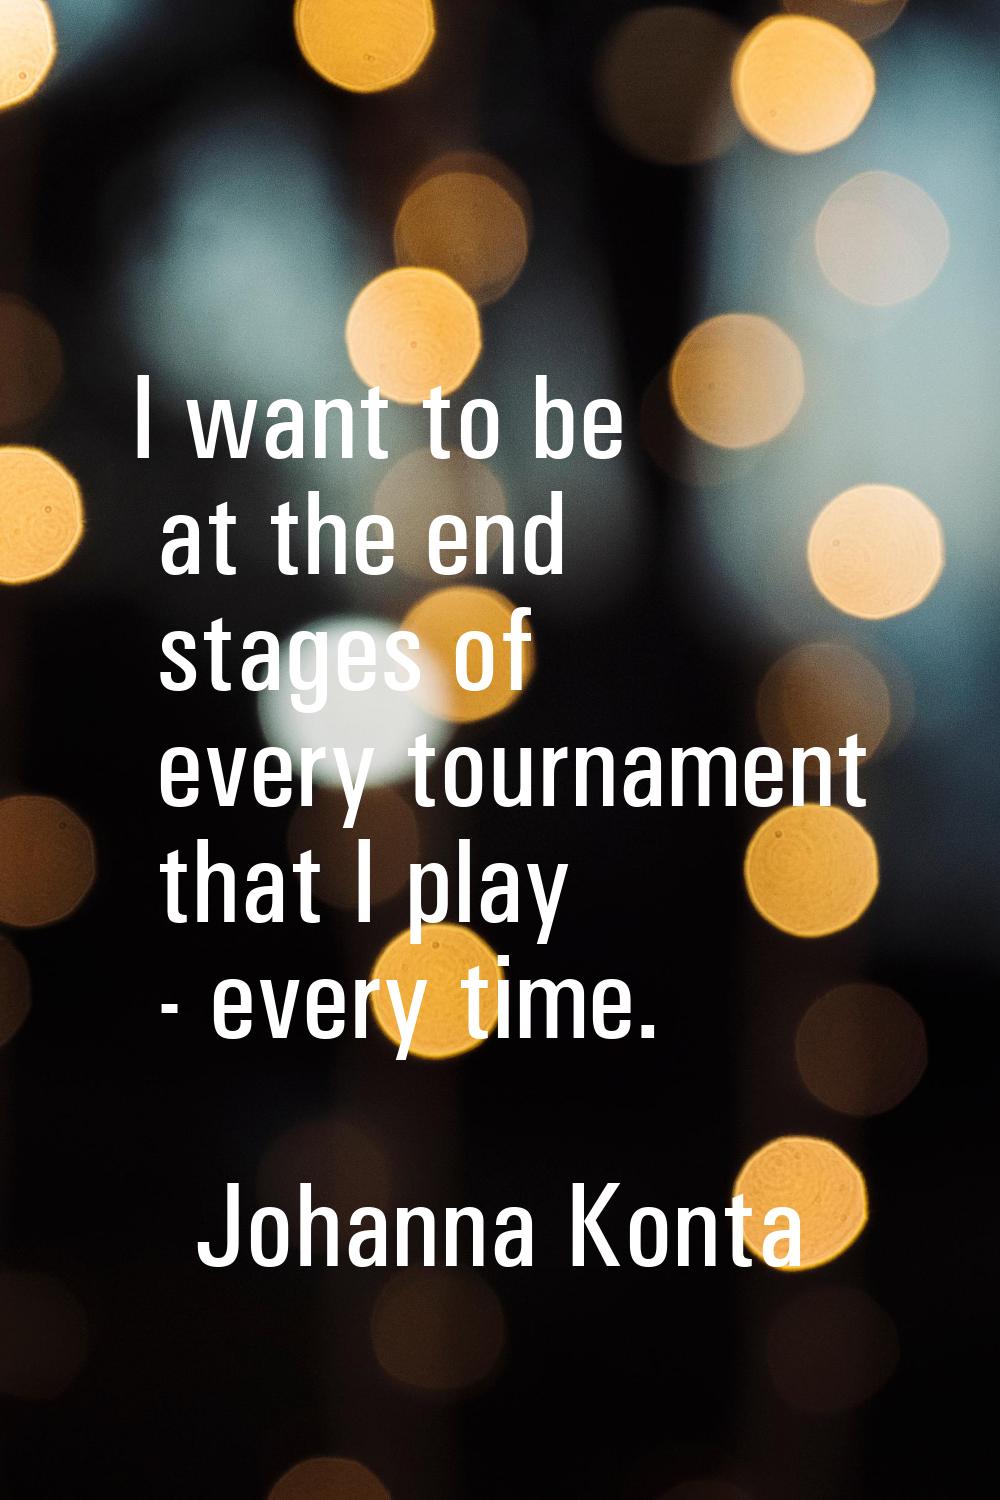 I want to be at the end stages of every tournament that I play - every time.